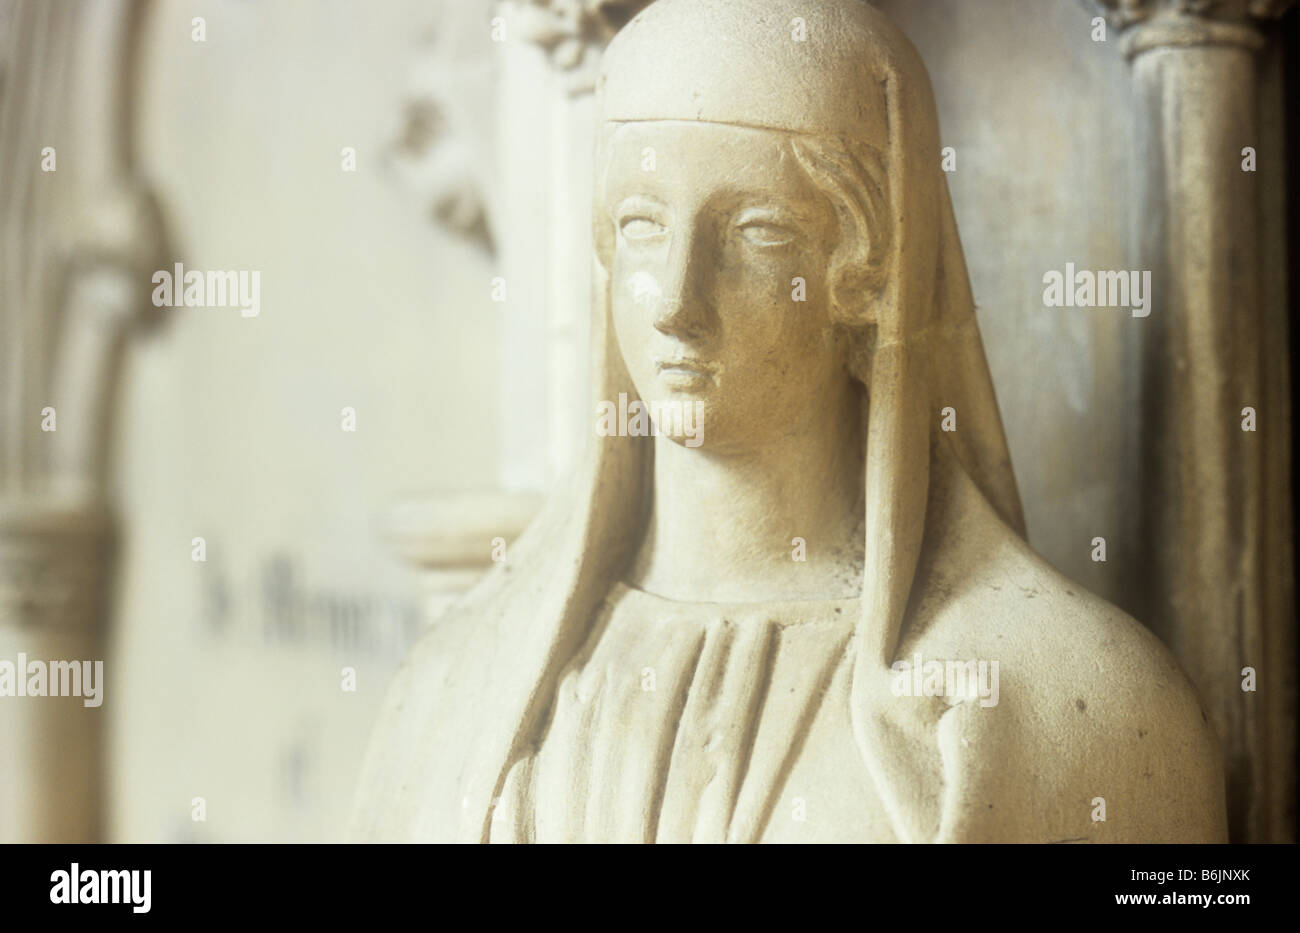 Detail of carved tomb statue of medieval womans head and shoulders with wimple and dress in warm light Stock Photo